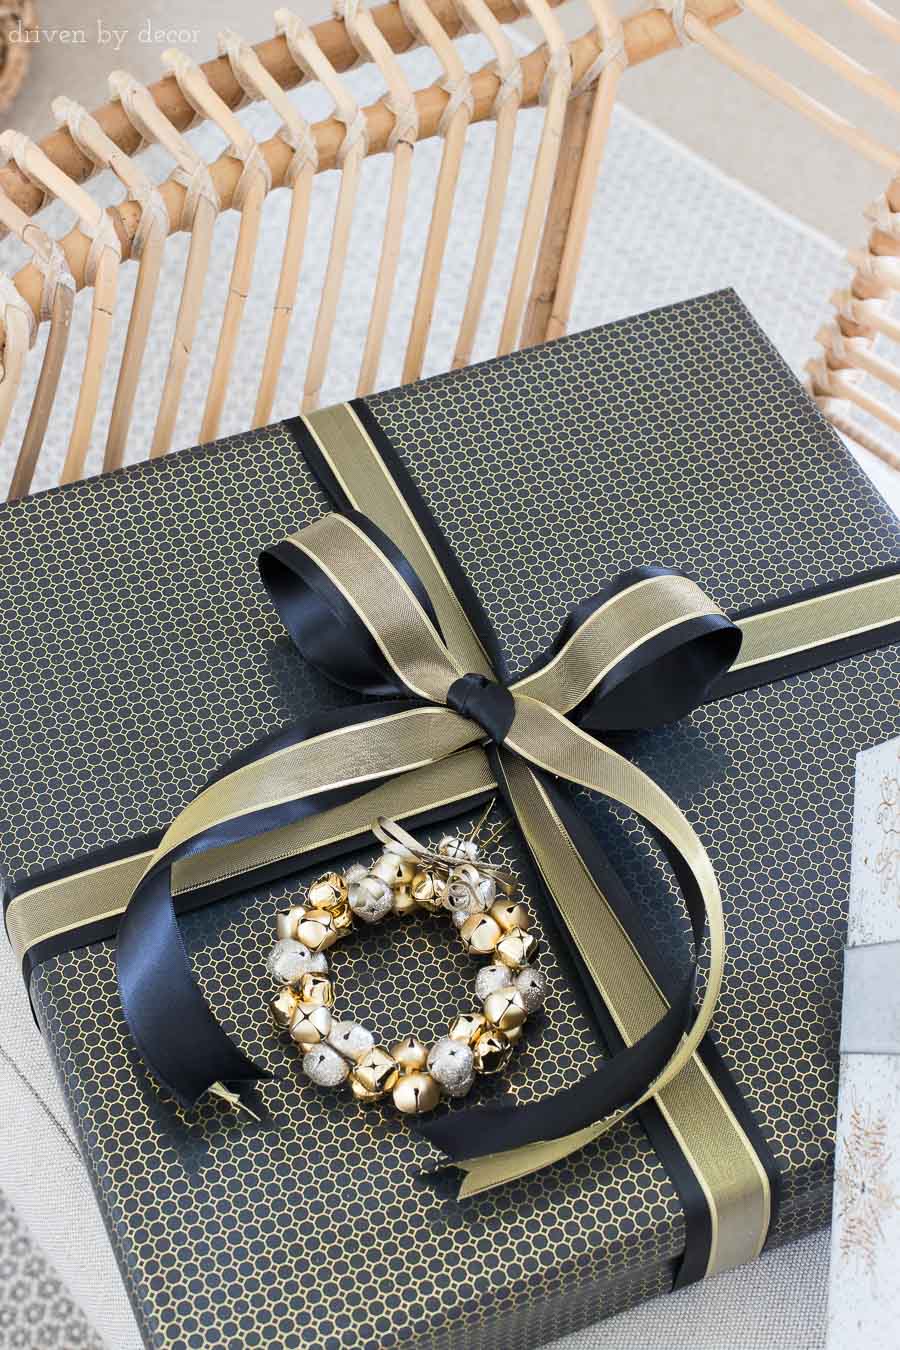 10 Christmas Gift Wrapping Ideas (To Take Your Presents to the Next